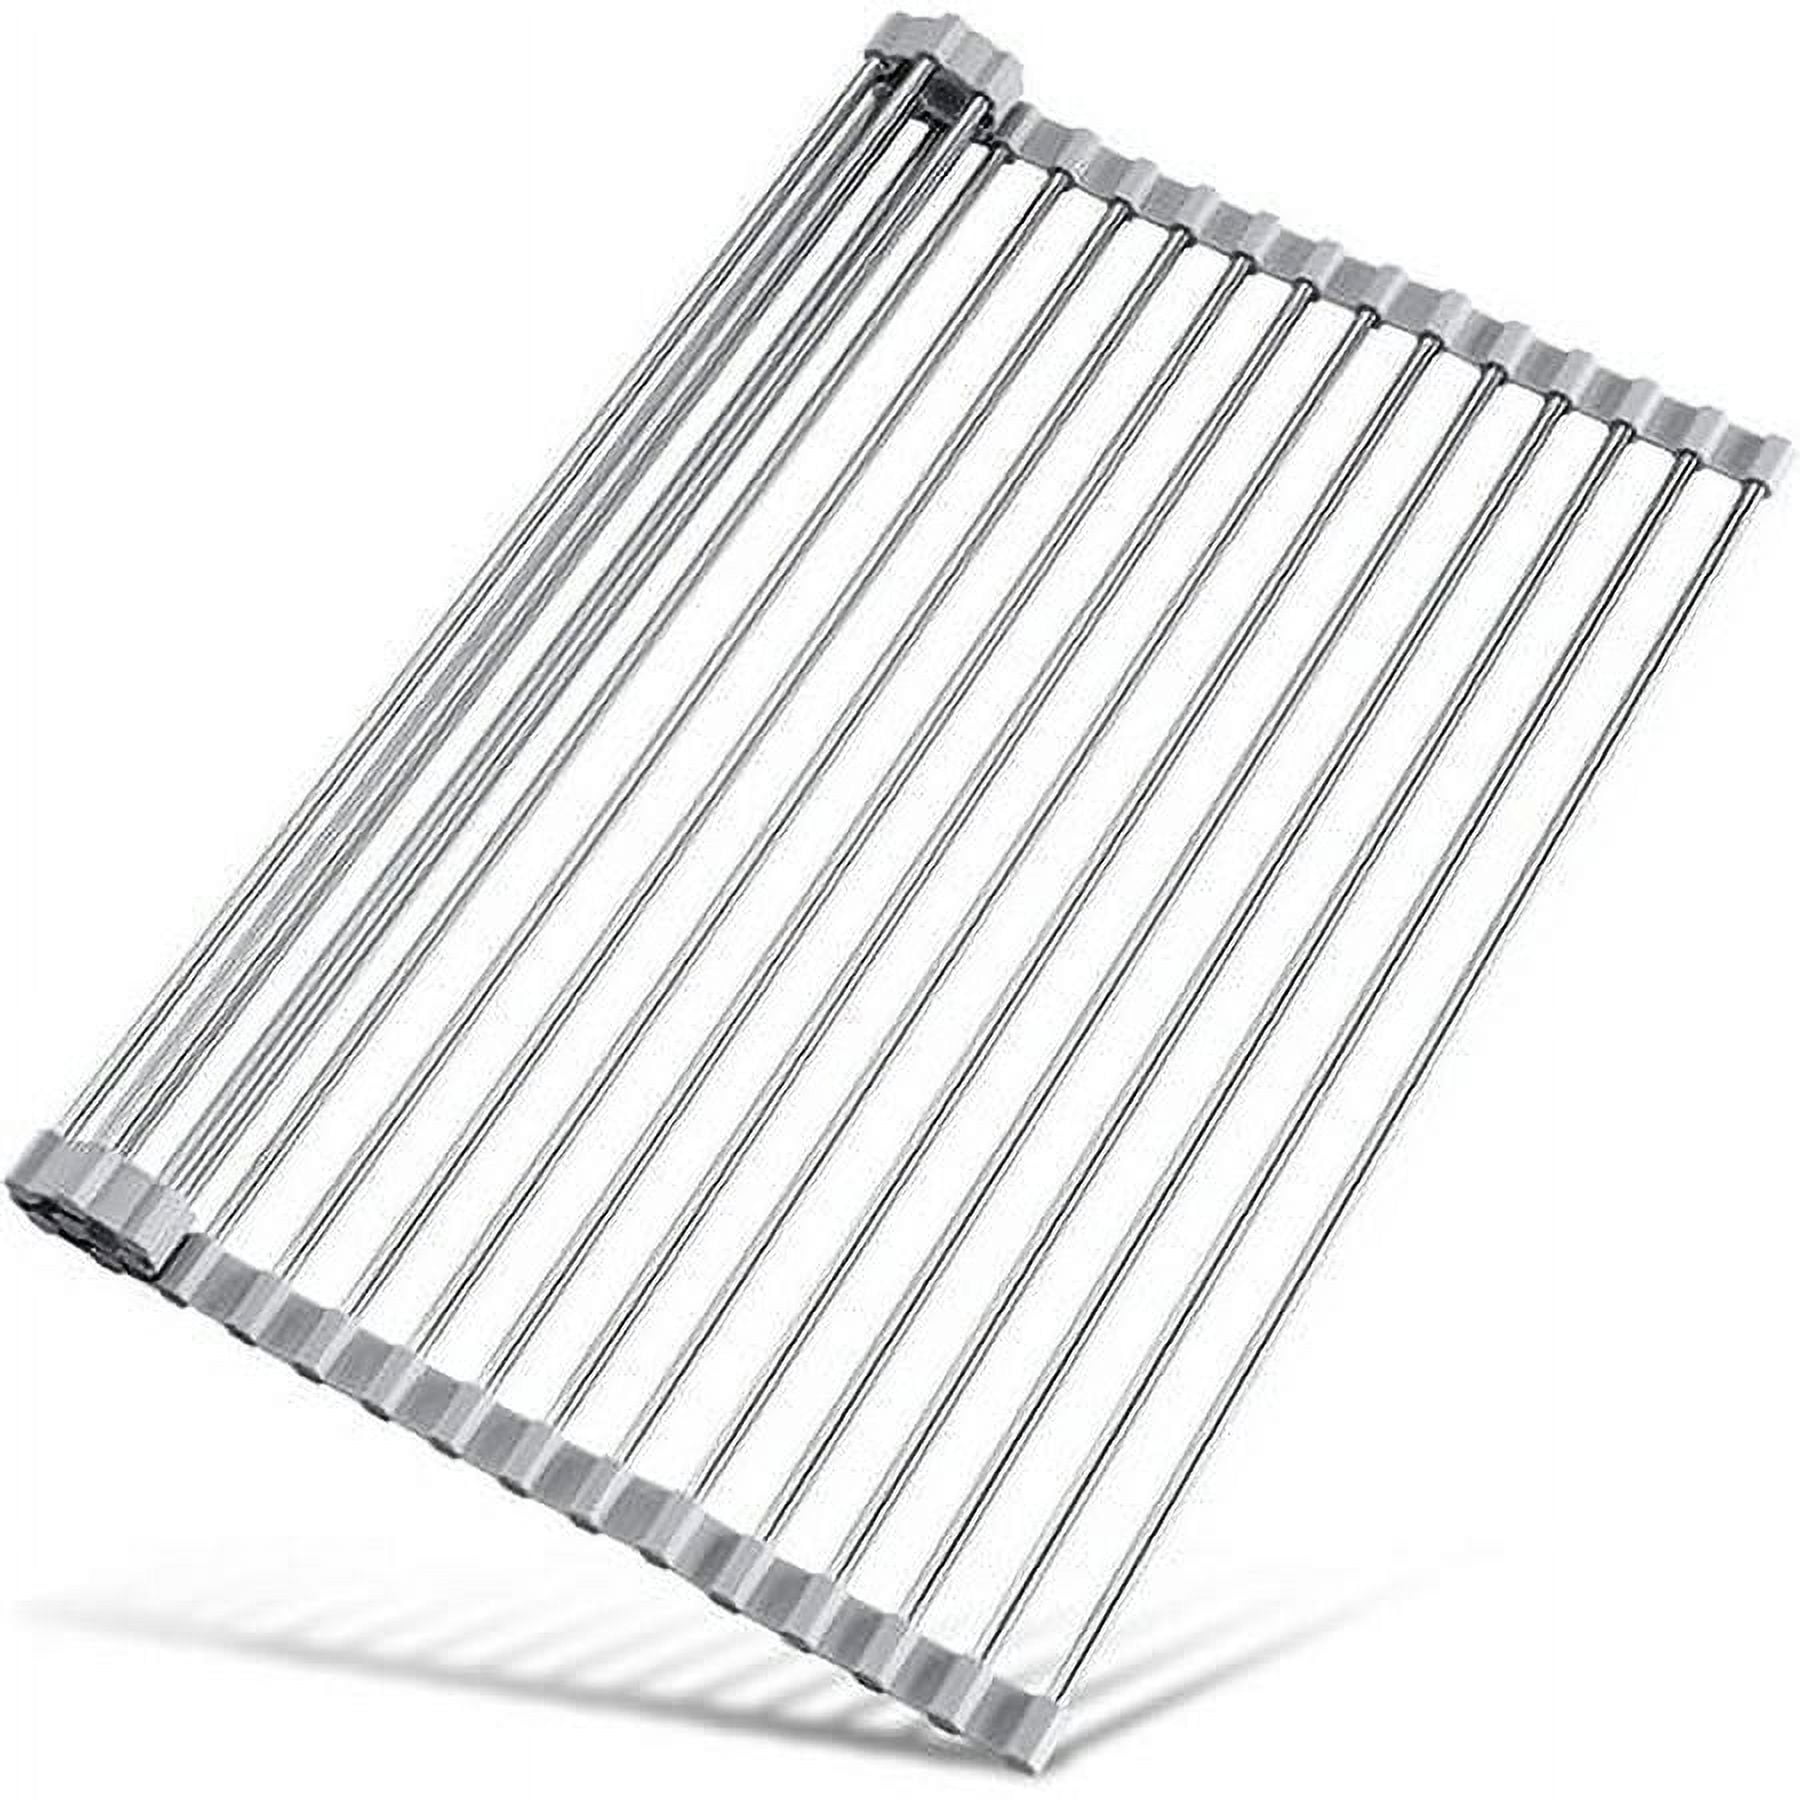 Uniqook Roll Up Dish Drying Rack - Over the Sink Multipurpose XL